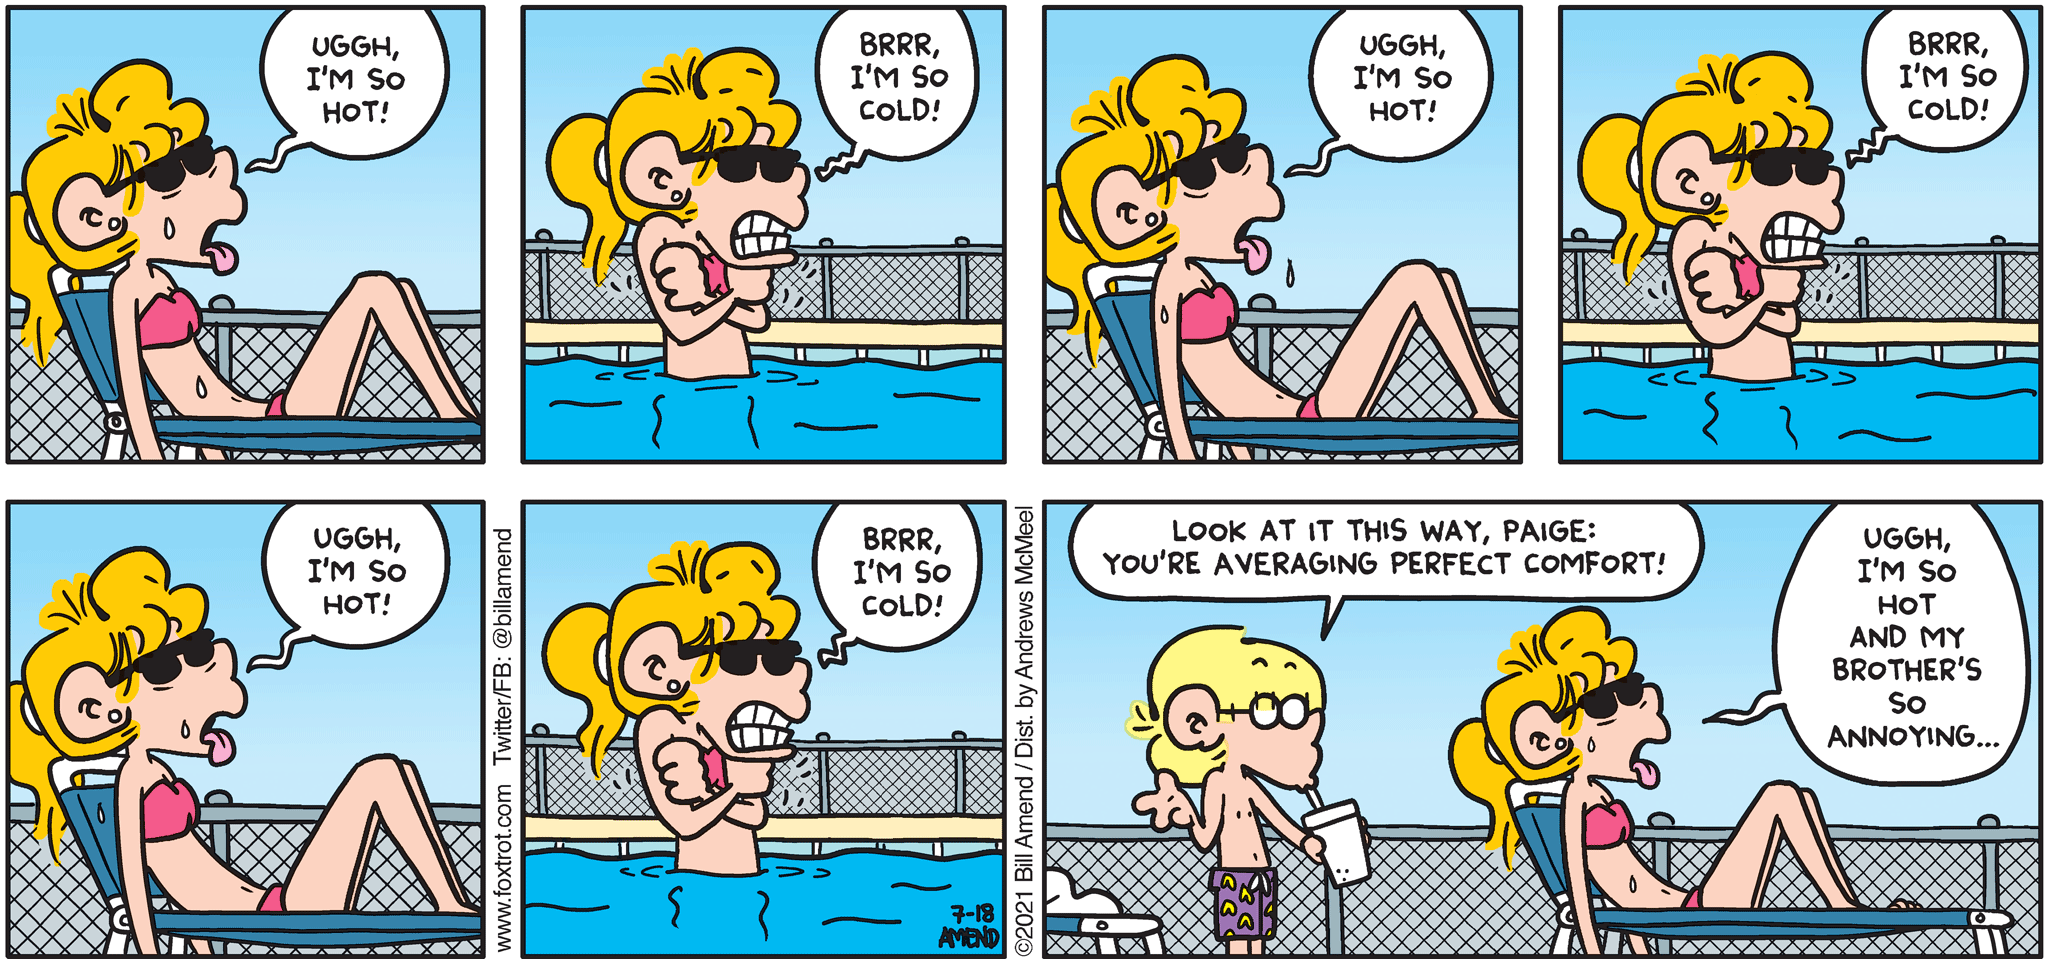 FoxTrot comic strip by Bill Amend - "Hot/Cold Girl Summer" published July 18, 2021 - Paige Fox: Uggh, I'm so hot. Brr. I'm so cold. Uggh, I'm so hot. Brrr, I'm so cold! Uggh, I'm so hot! Brrr, I'm so cold! Jason Fox: Look at it this way, Paige Fox: You're averaging perfect comfort! Paige Fox: Uggh, I'm so hot and my brother's so annoying...